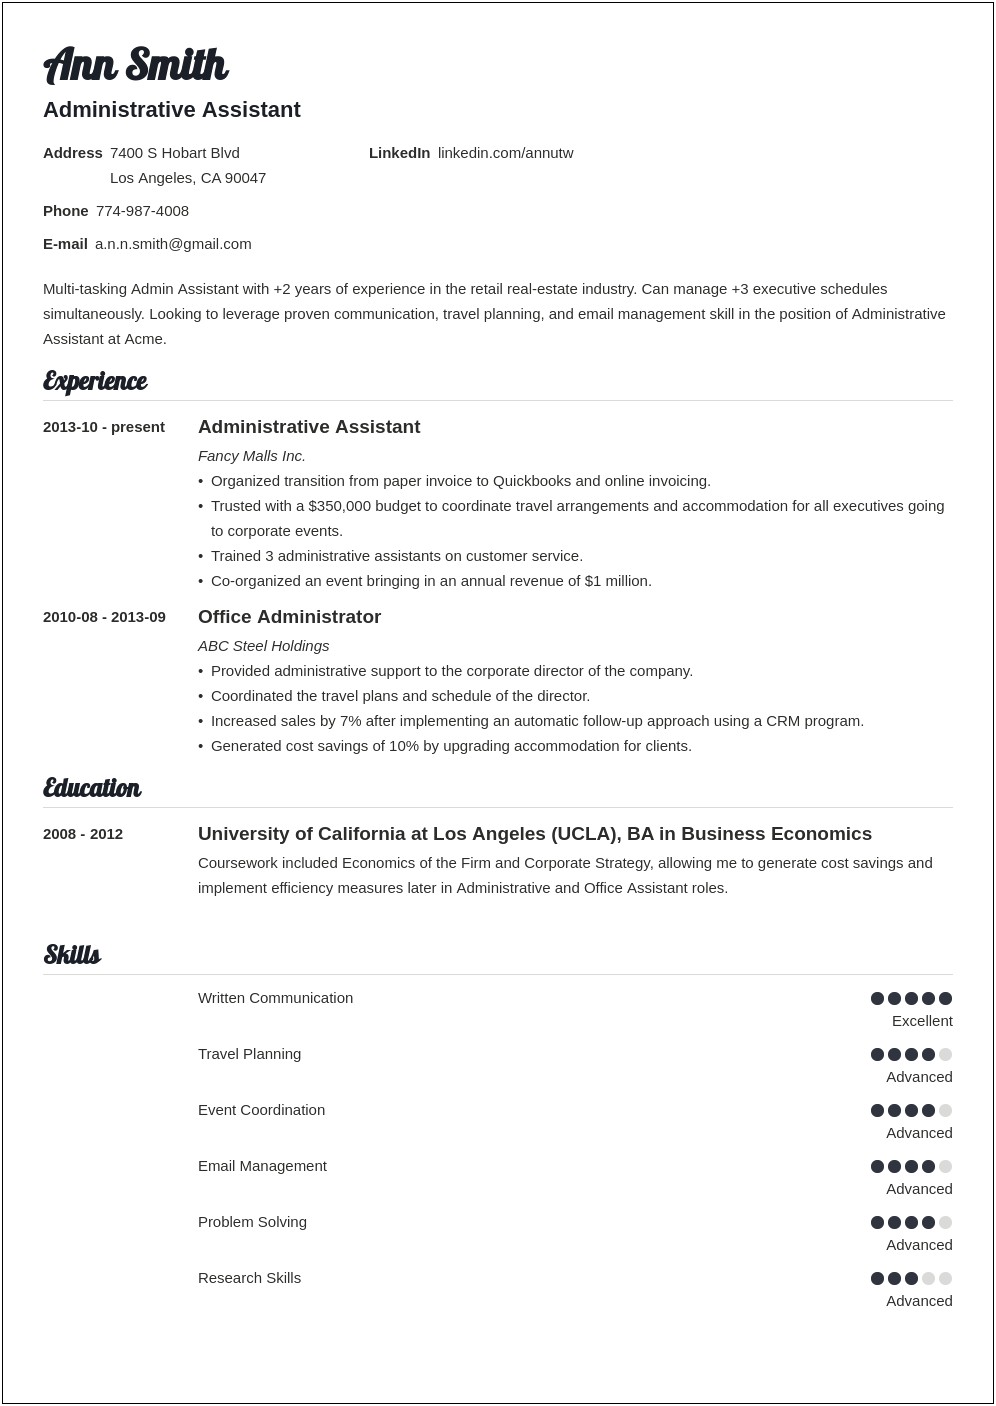 Good Objective Statements For Administrative Assistant Resume